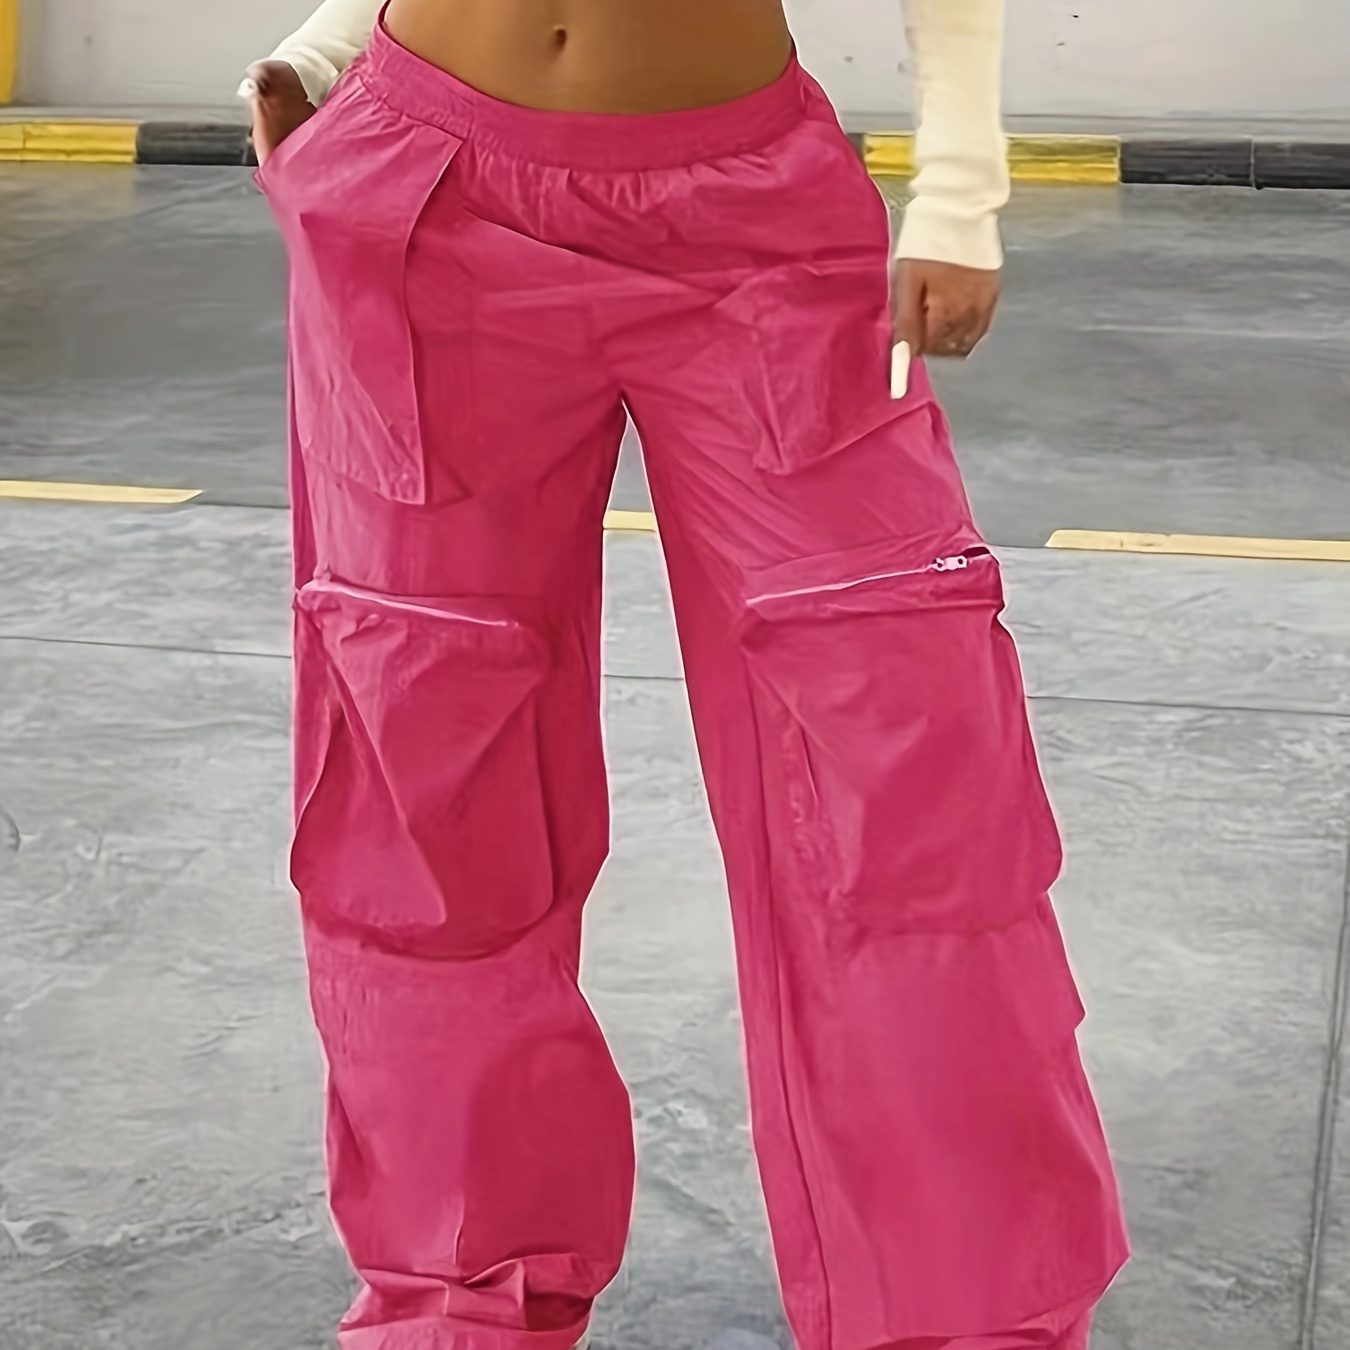 

Solid Baggy Cargo Pants, Vintage Elastic Waist Hip-hop Pants With Pocket, Women's Clothing